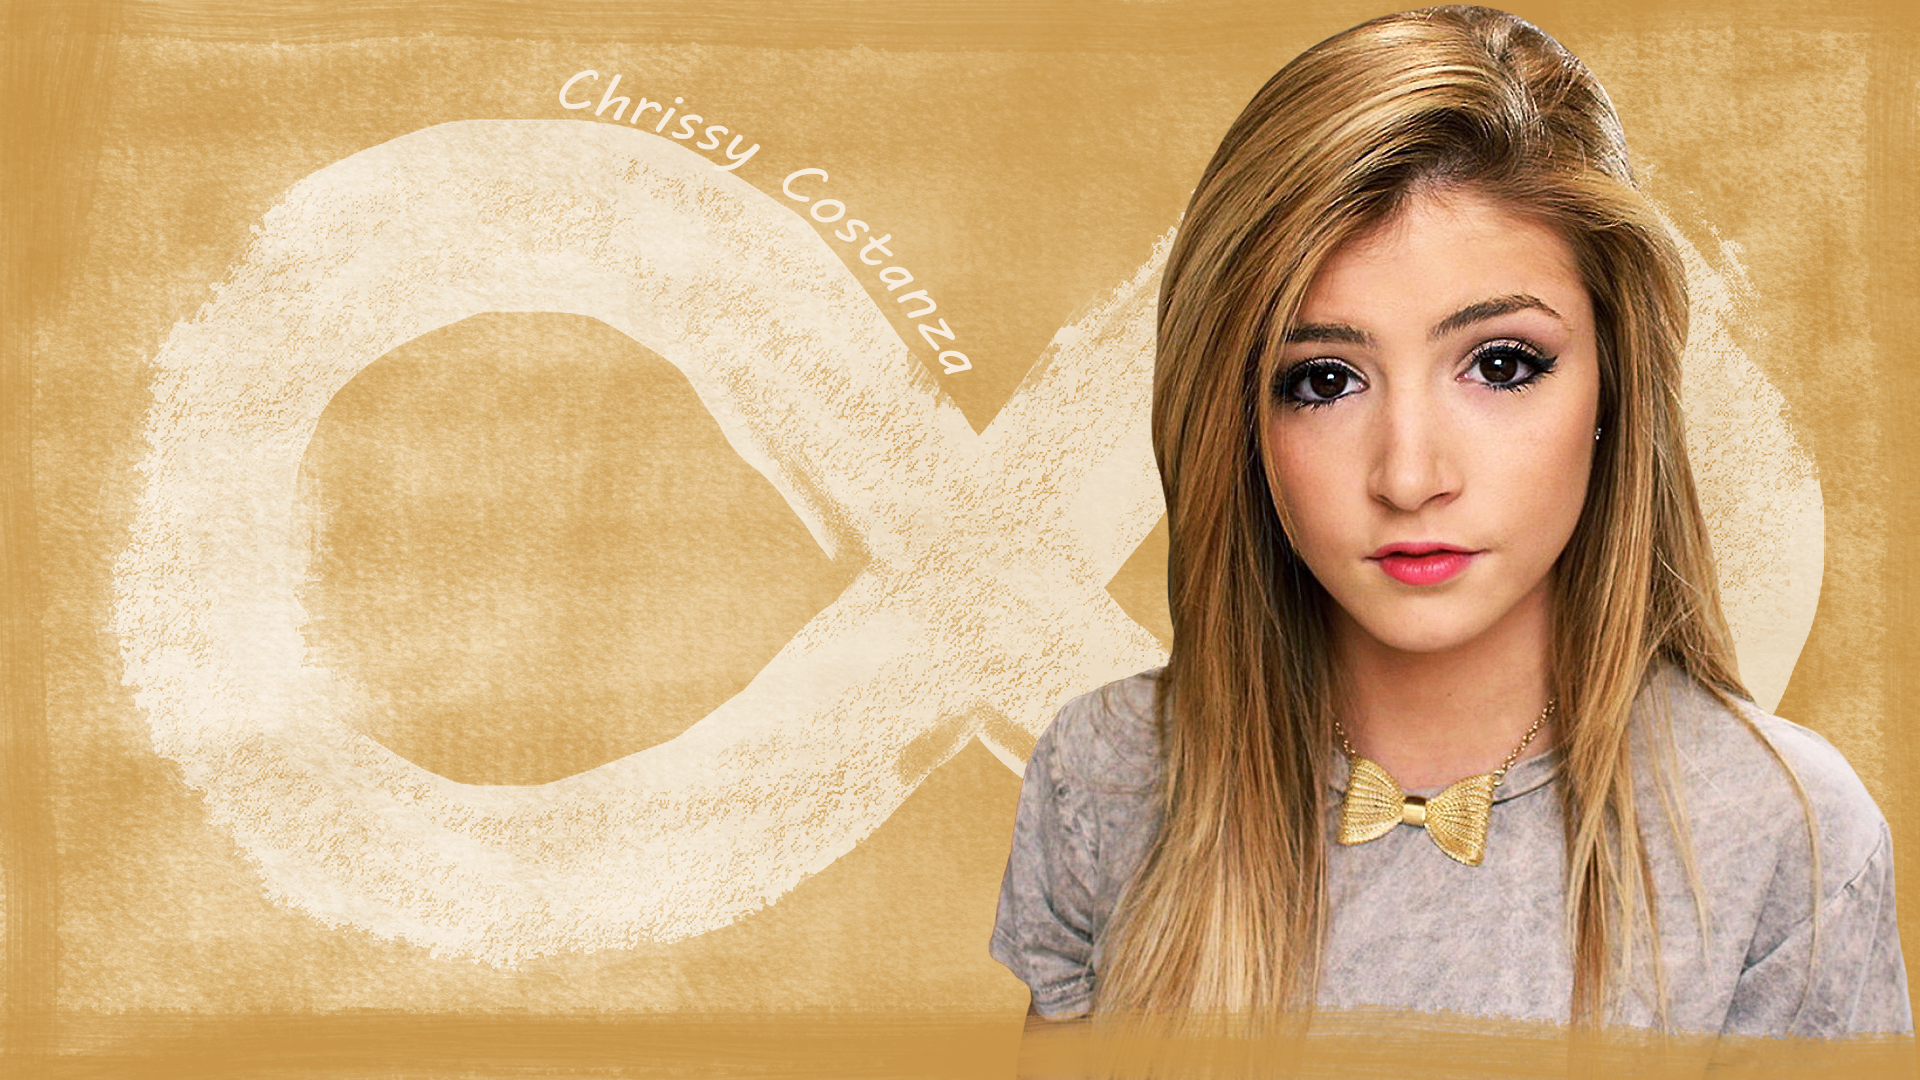 Full HD Images Chrissy Costanza 3720.47 Kb